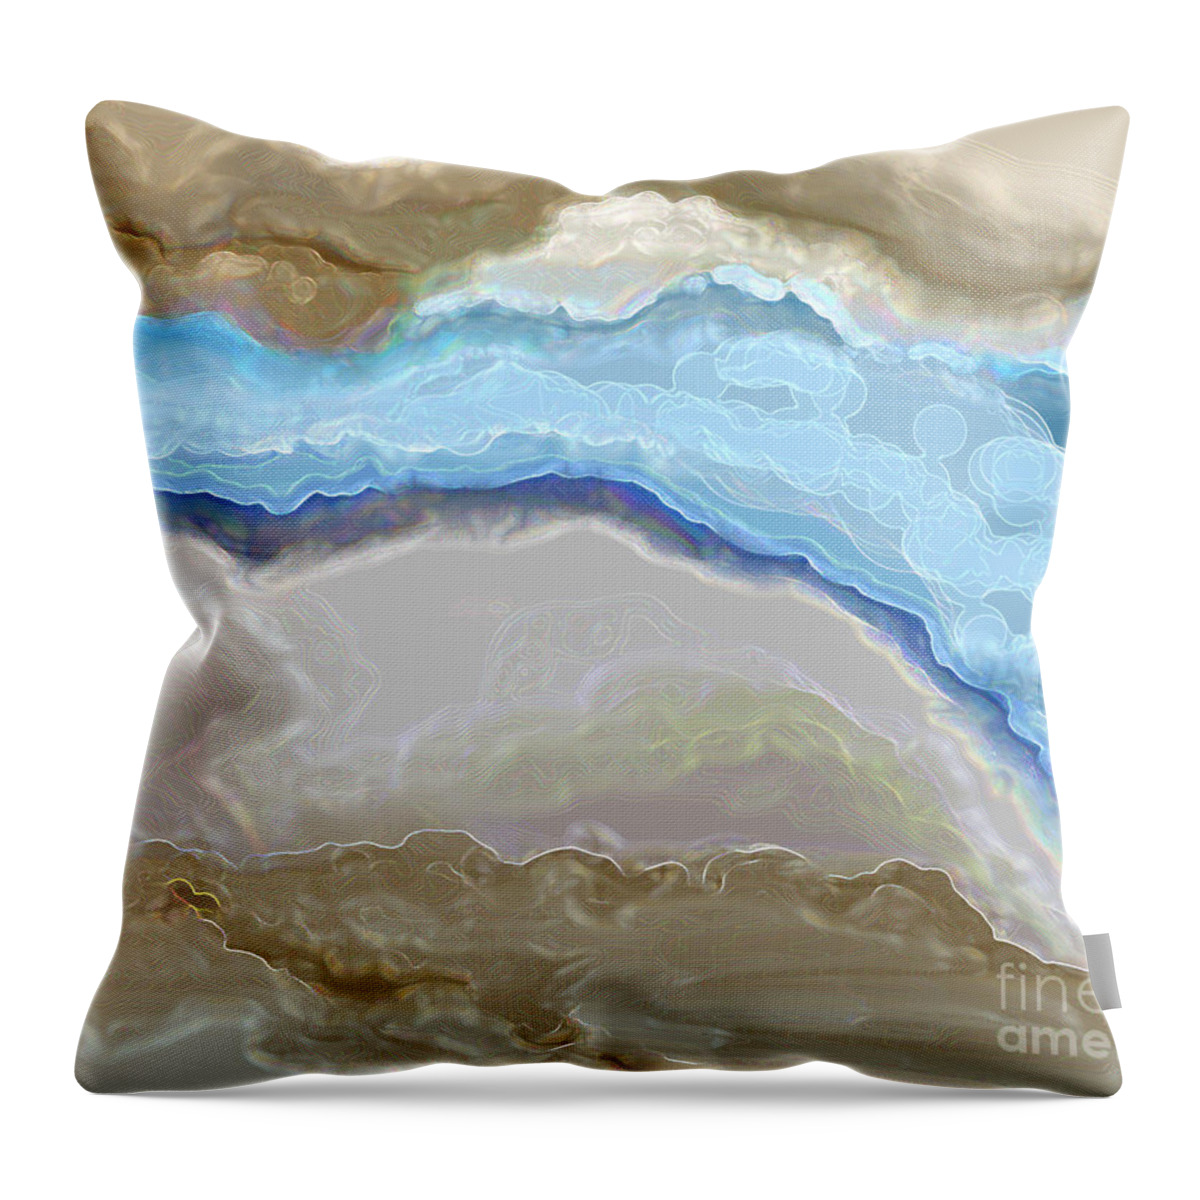 Abstract Digital Art Throw Pillow featuring the digital art The River by Lena Wilhite